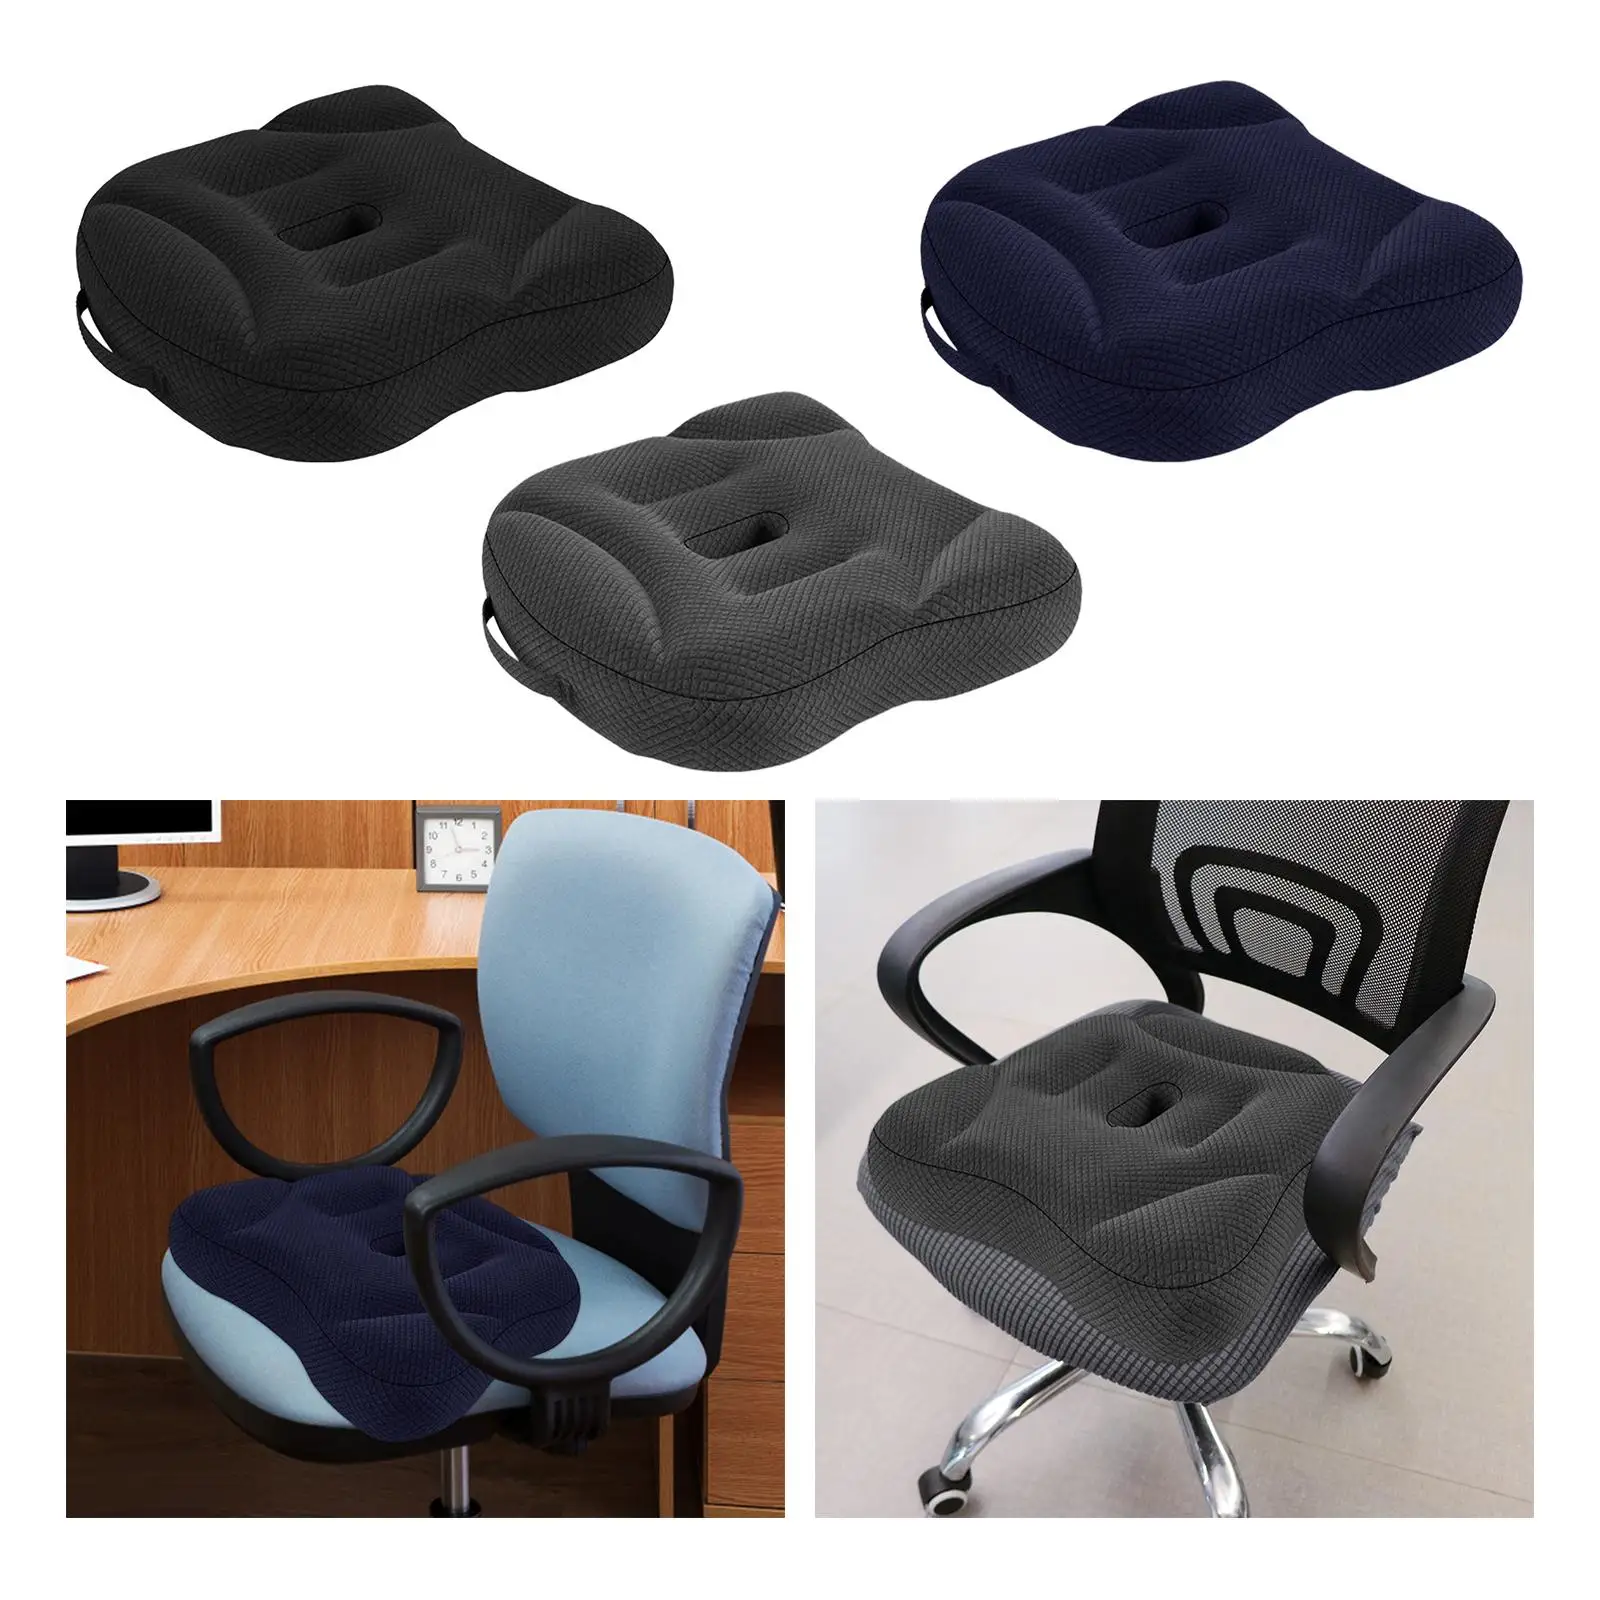 Seat Cushion Pillow Comfortable Breathable Non Slip for Office Chair Pad Ergonomic Seat Pillow Desk Chair Cushion for Driving